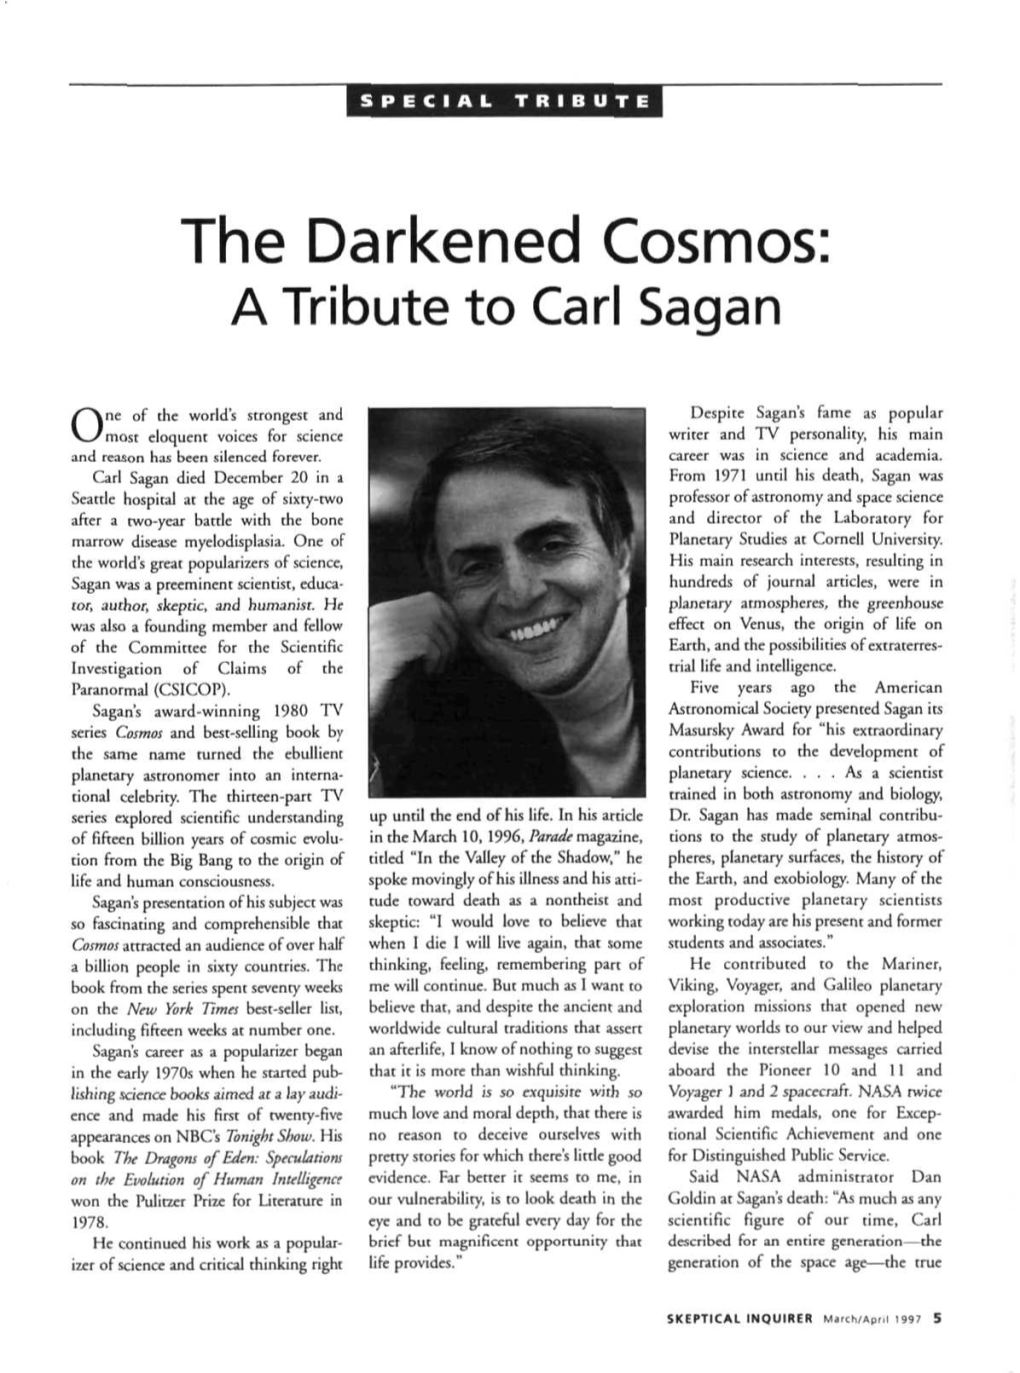 The Darkened Cosmos: a Tribute to Carl Sagan